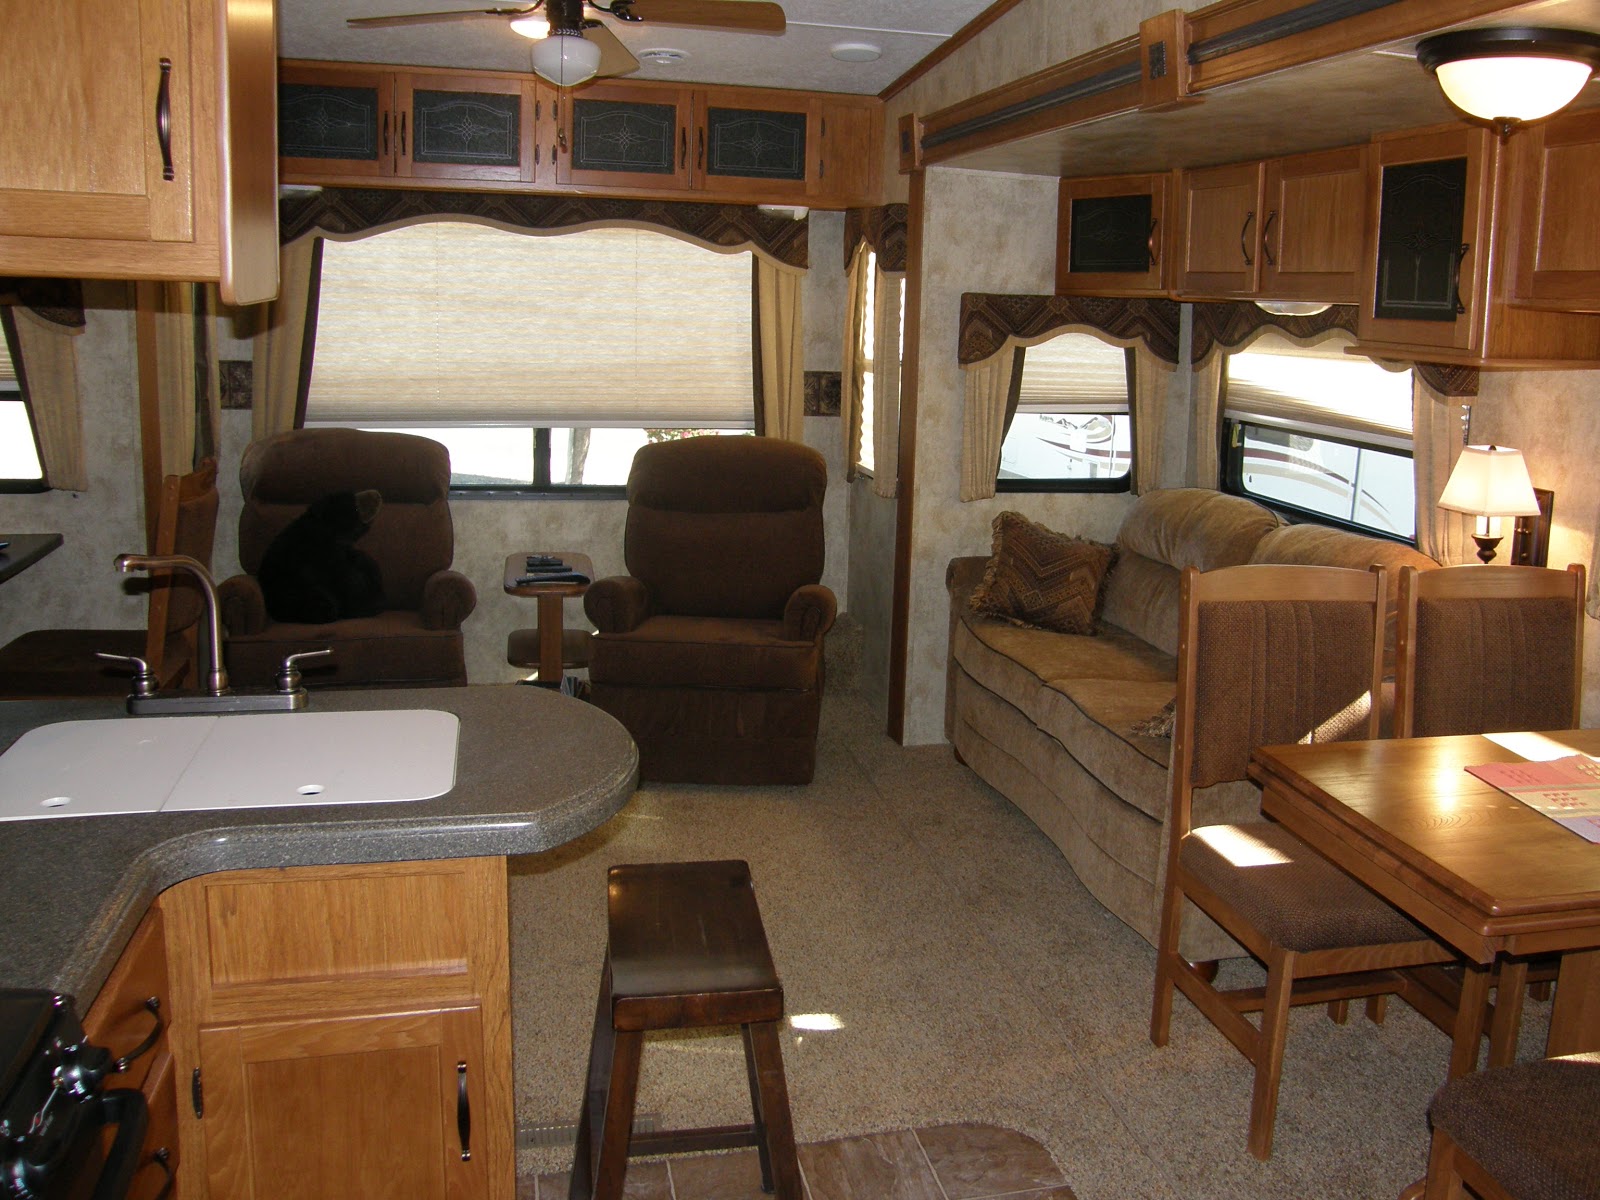 Roving S By Doug P Purchasing A New Camper Montana